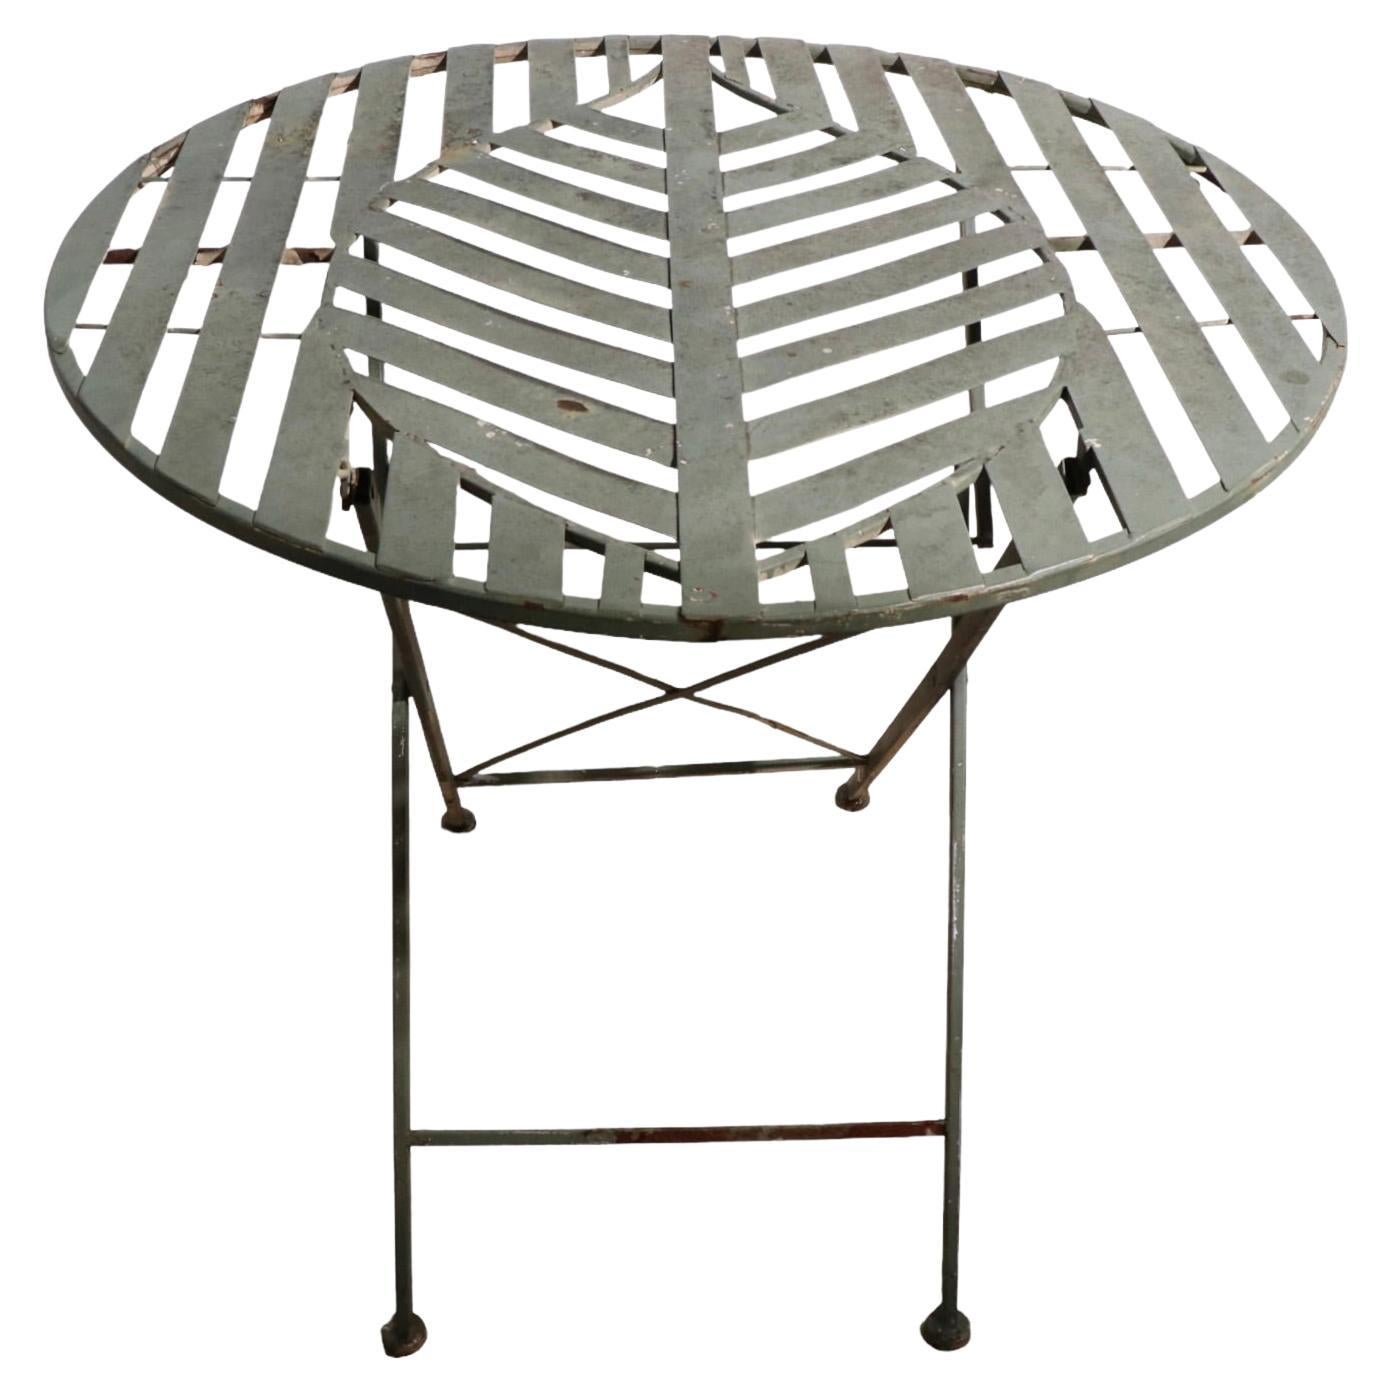 Folding Metal Garden Patio Poolside Table with Stylized Leaf Motif Top